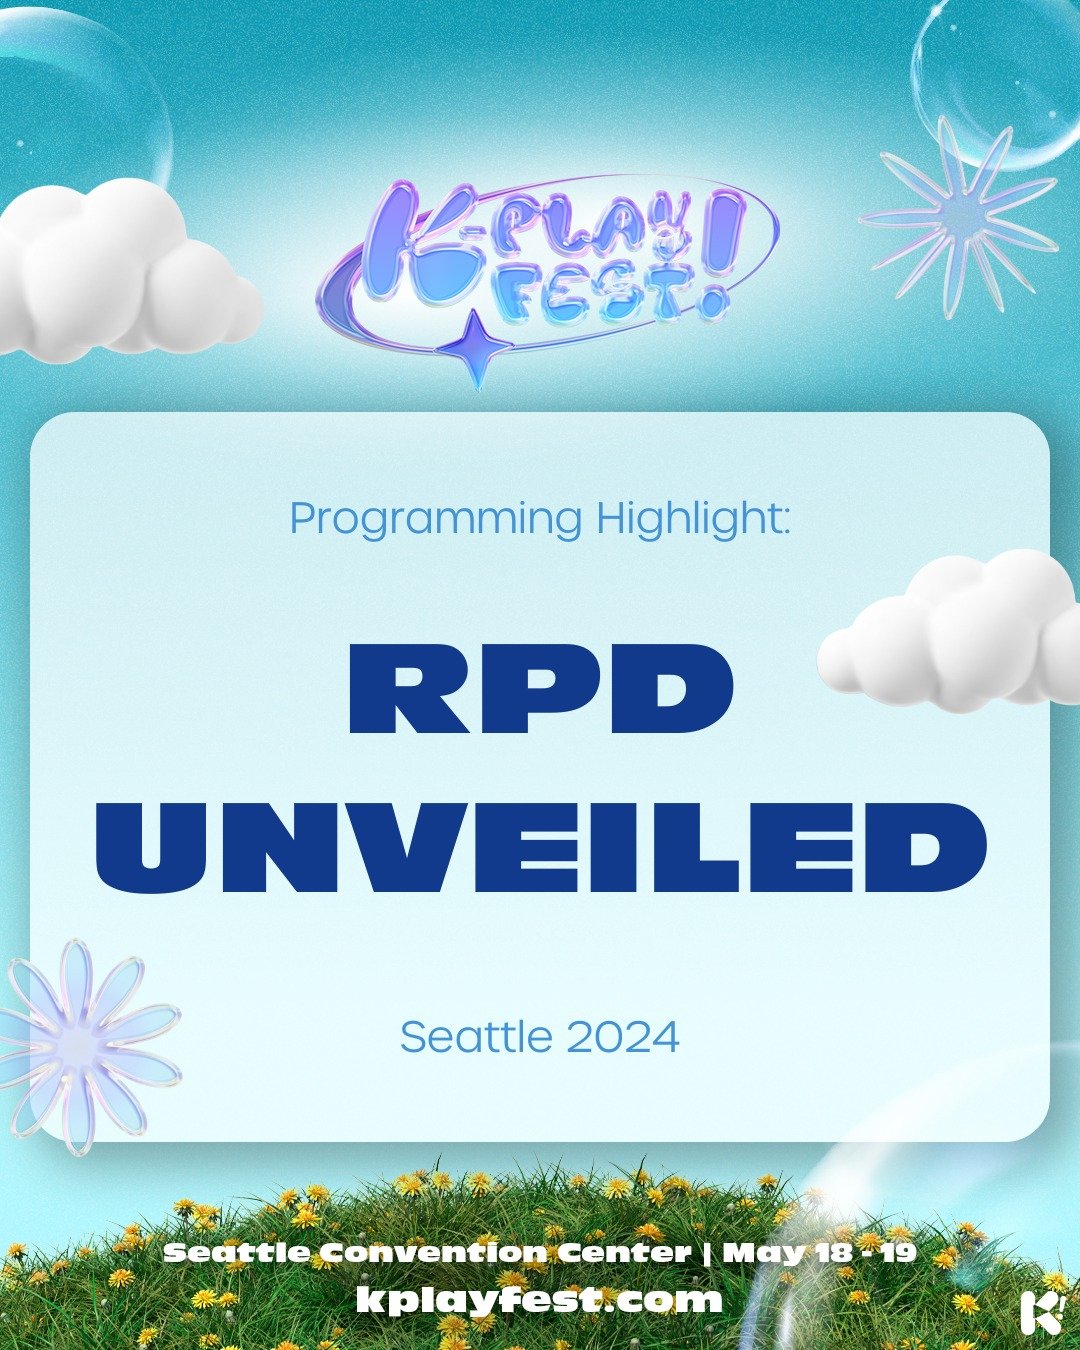 Take a chance, baby let&rsquo;s take a chance ⭐ and try to learn as many songs as we can for RPD UNVEILED! 🕺 Check out our song list 🎶 and start practicing! 💪

*We will host multiple RPDs all weekend long at #kplayfestsea2024 🌟 So if you don&rsqu